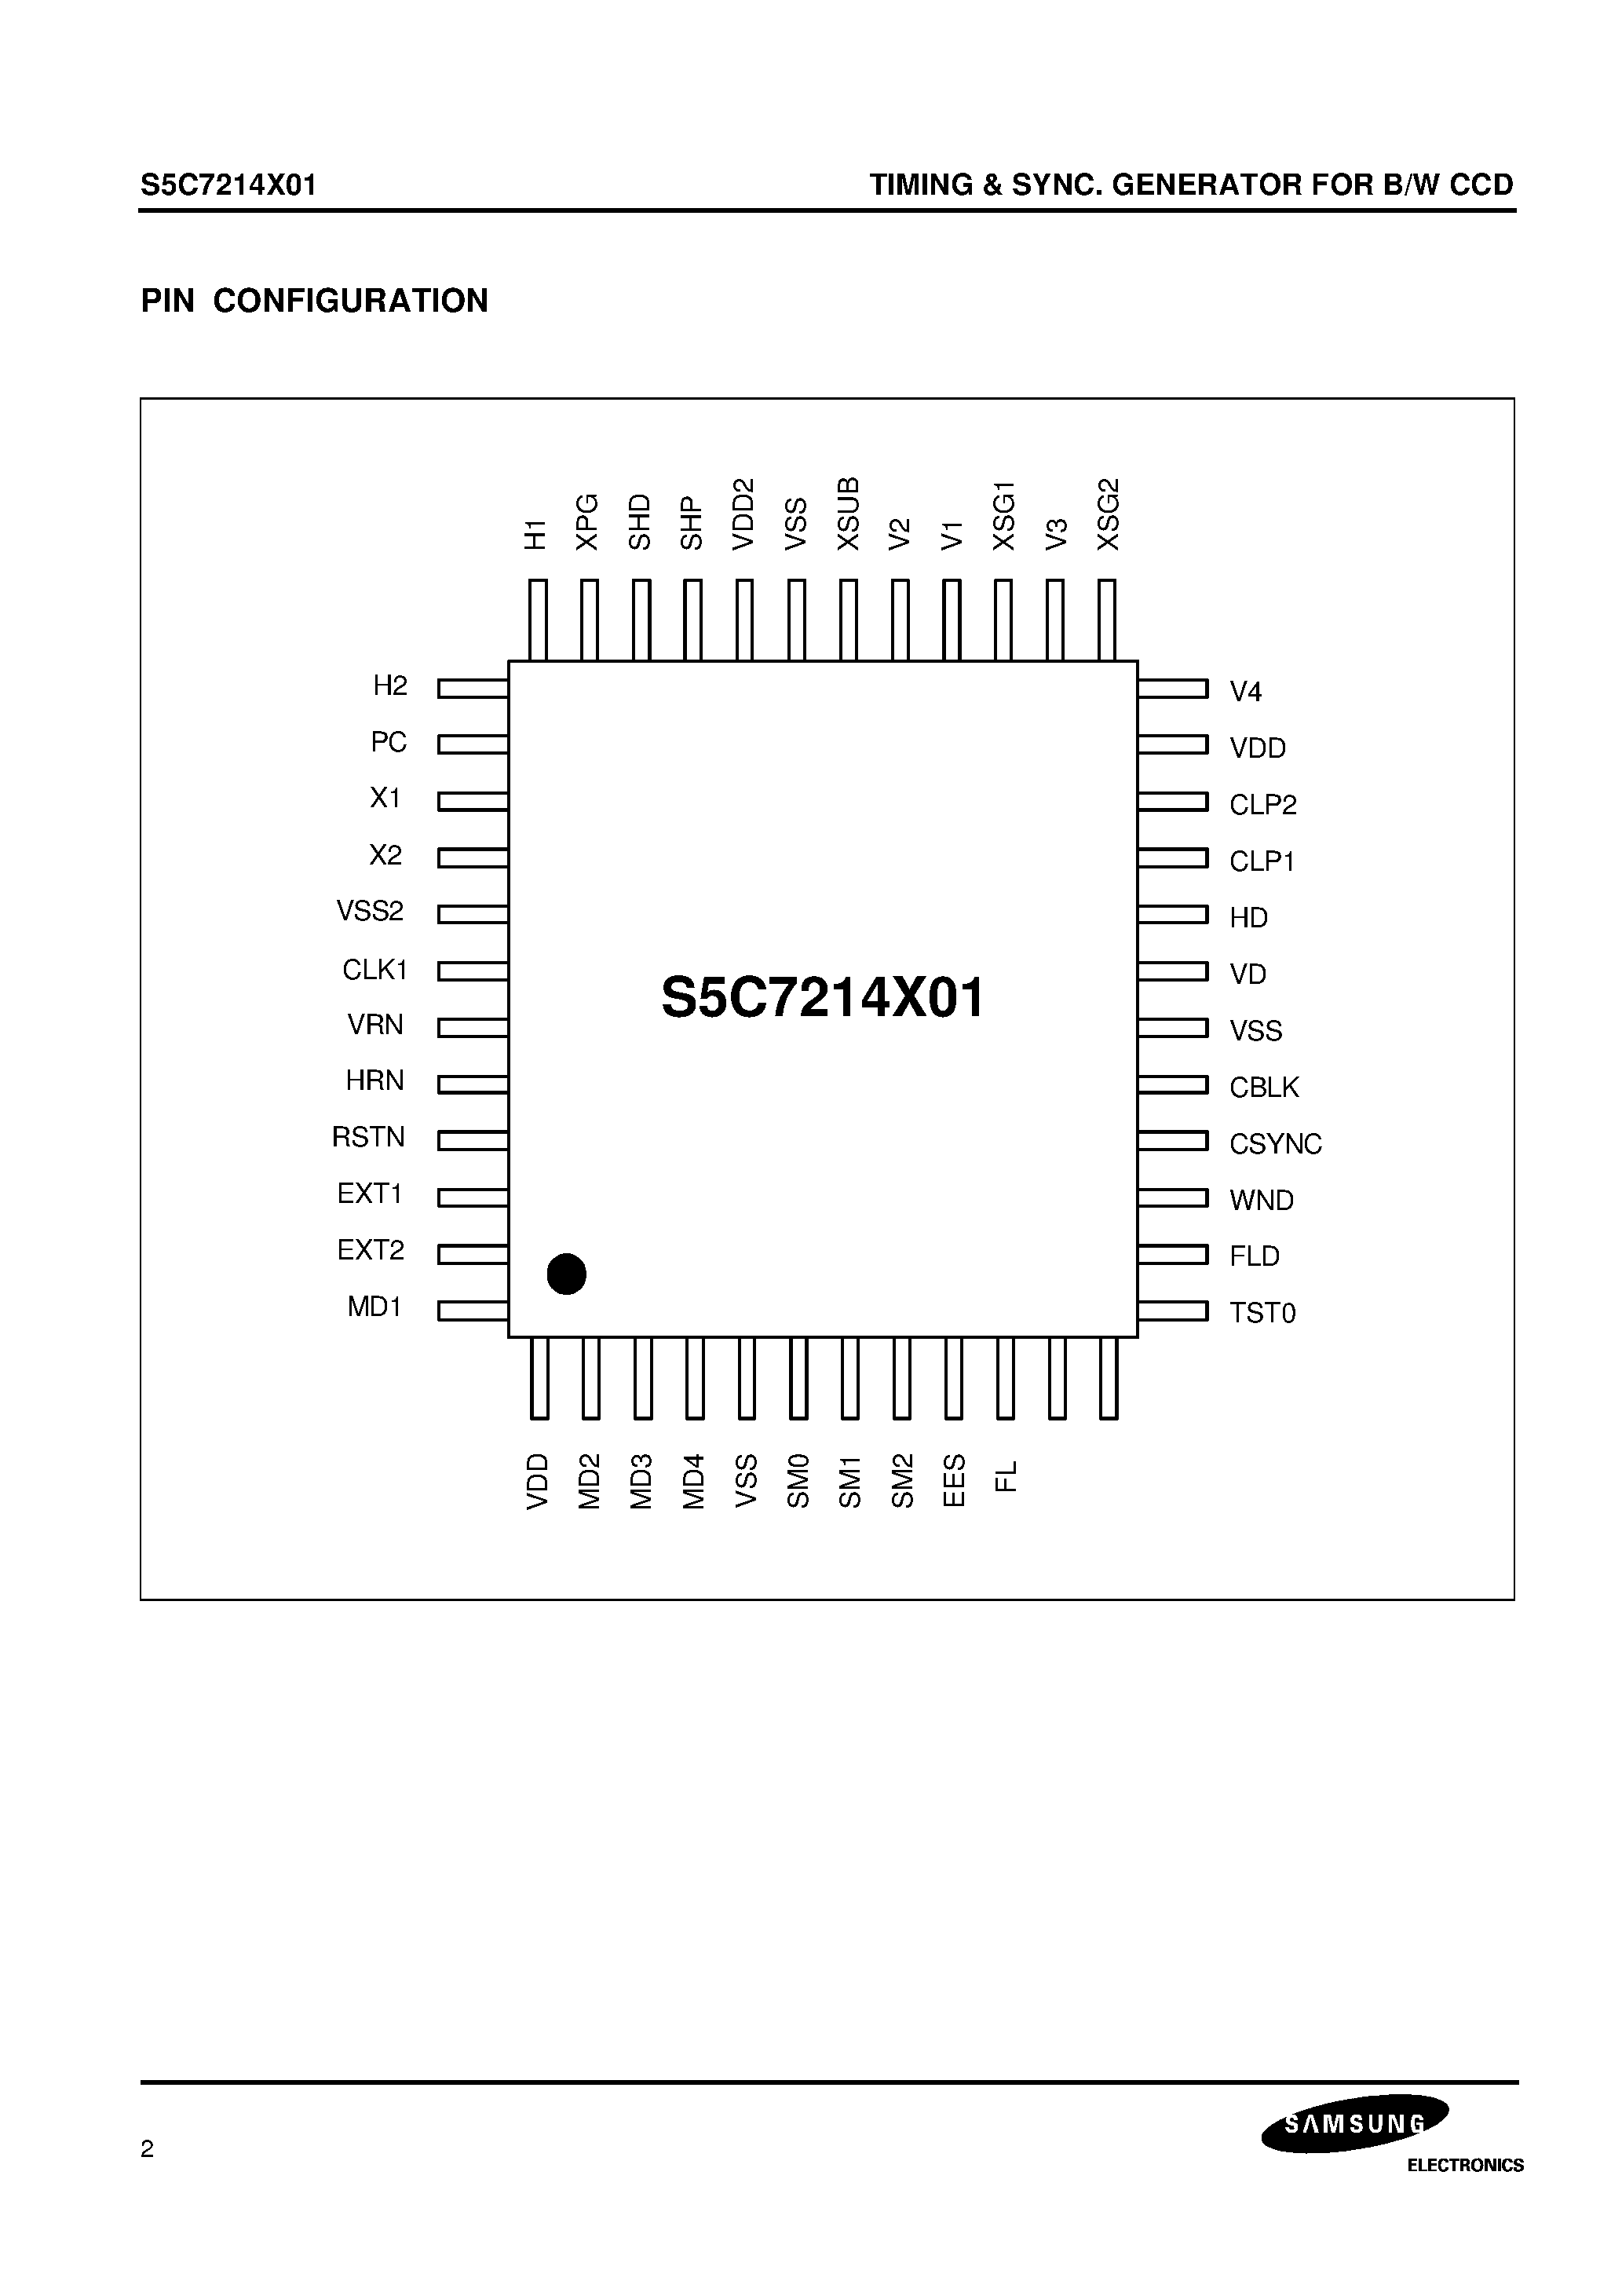 Datasheet S5C7214X01-E0R0 - TIMING & SYNC. GENERATOR FOR B/W CCD page 2